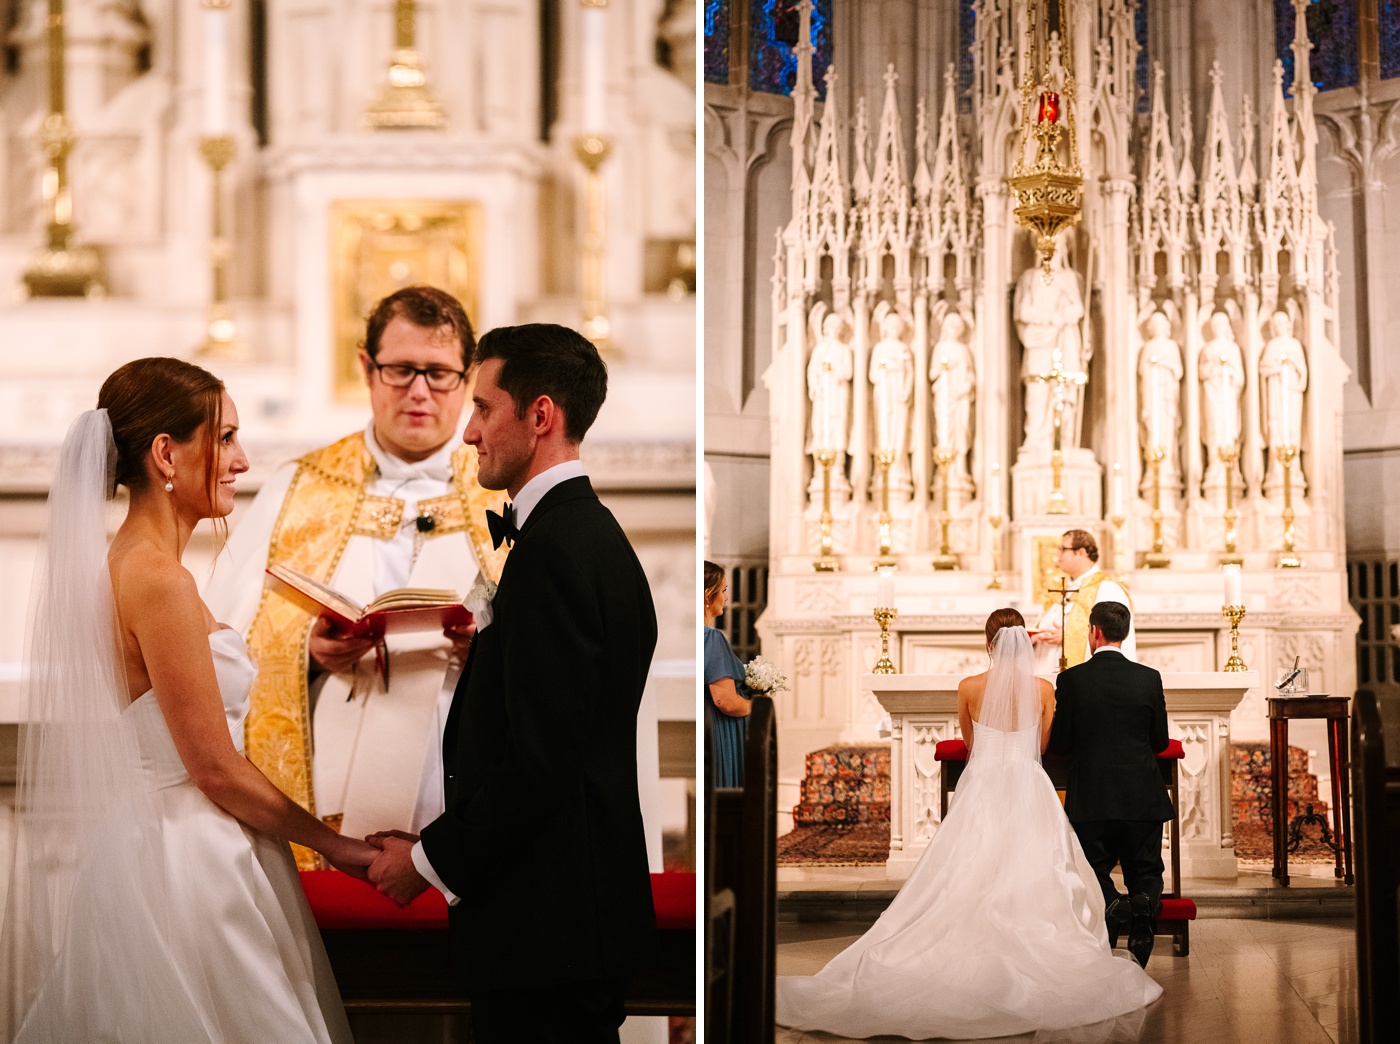 Catholic wedding ceremony at St. James Chapel in Chicago, IL